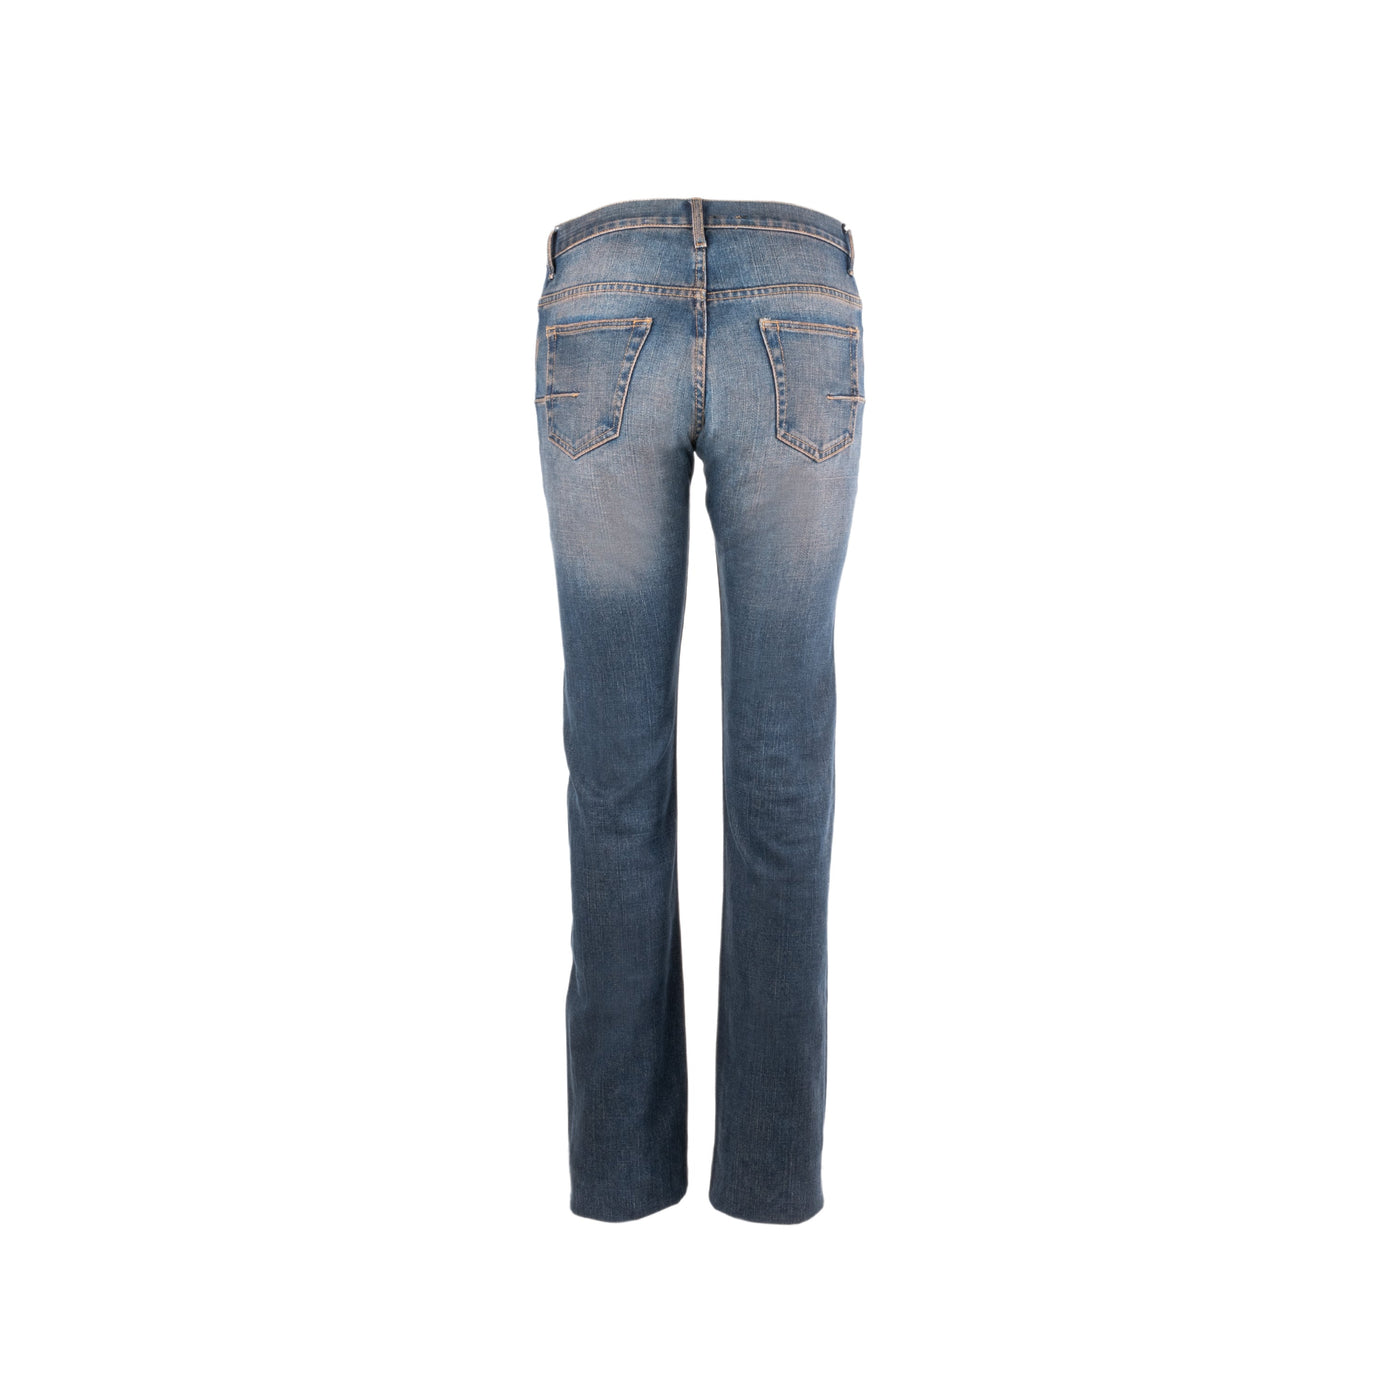 Dior straight jeans, dark wash, low waist pre-owned